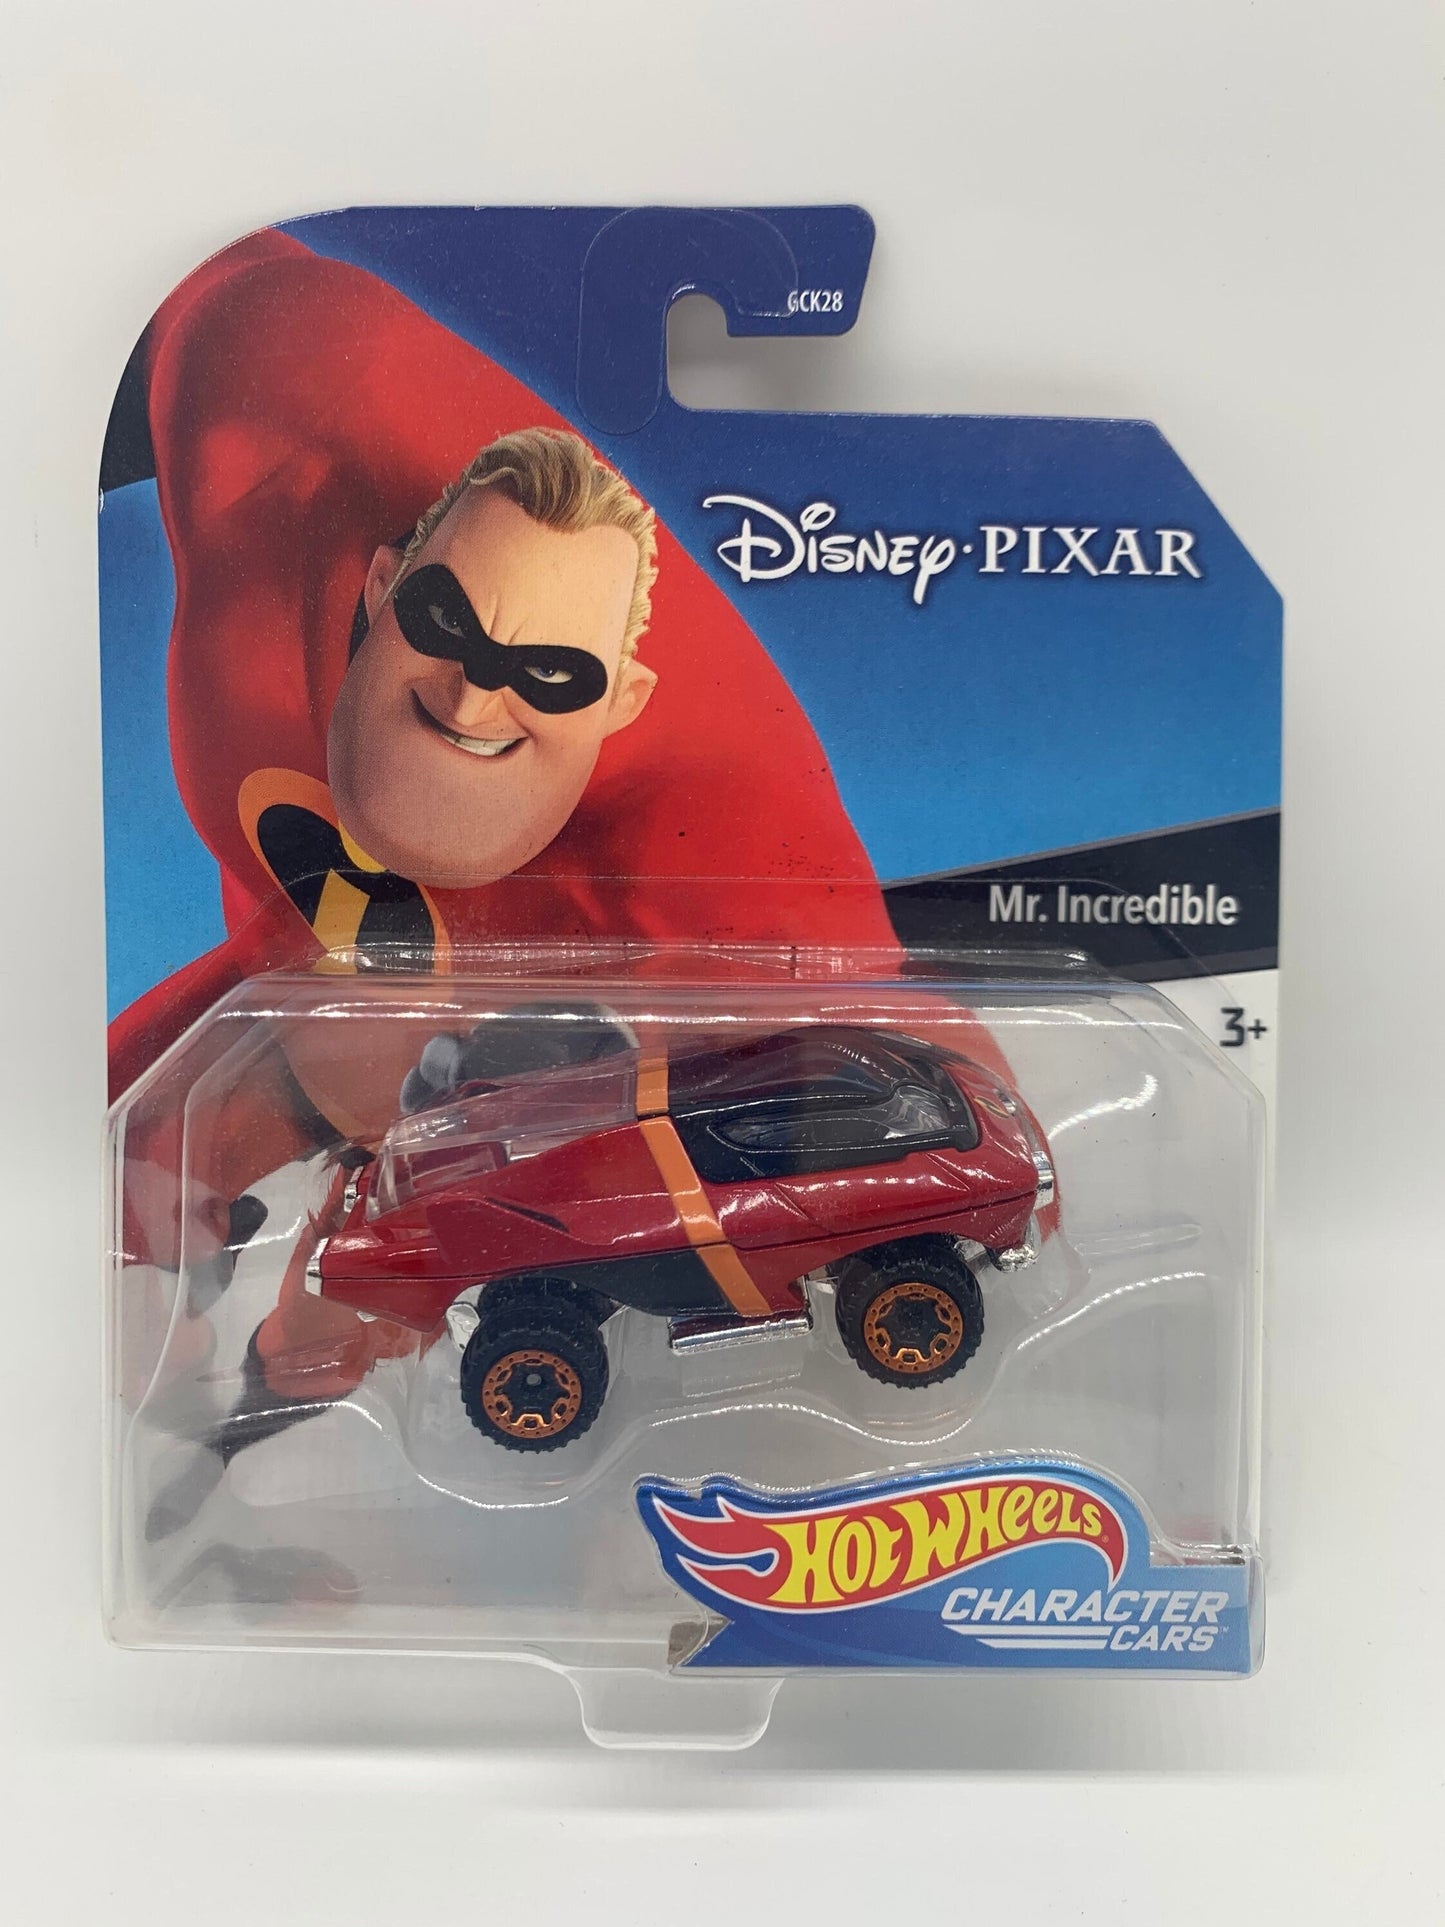 Hot Wheels Mr Incredible The Incredibles Red Disney Character Cars Perfect Birthday Gift Miniature Collectable Model Toy Car